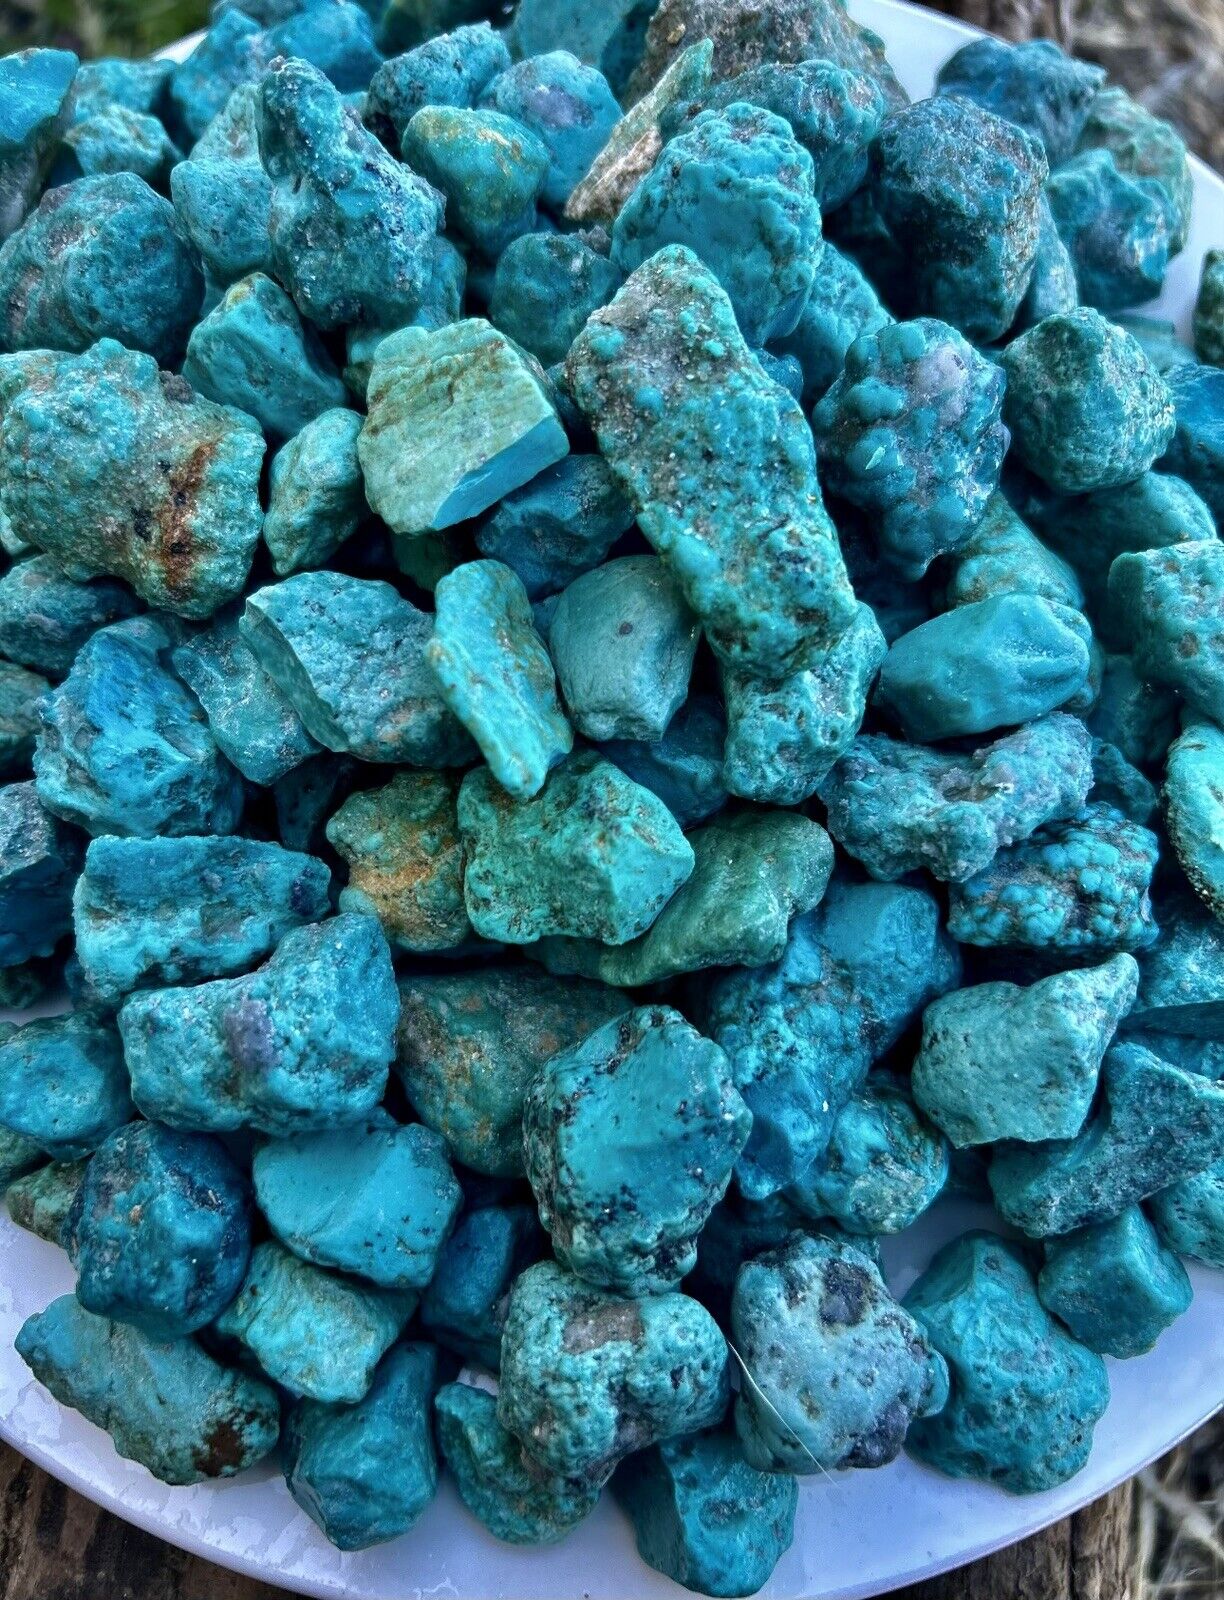 Blue Basin/Turquoise Mountain. Matched electric blues 10 Pounds. Almost Gone.